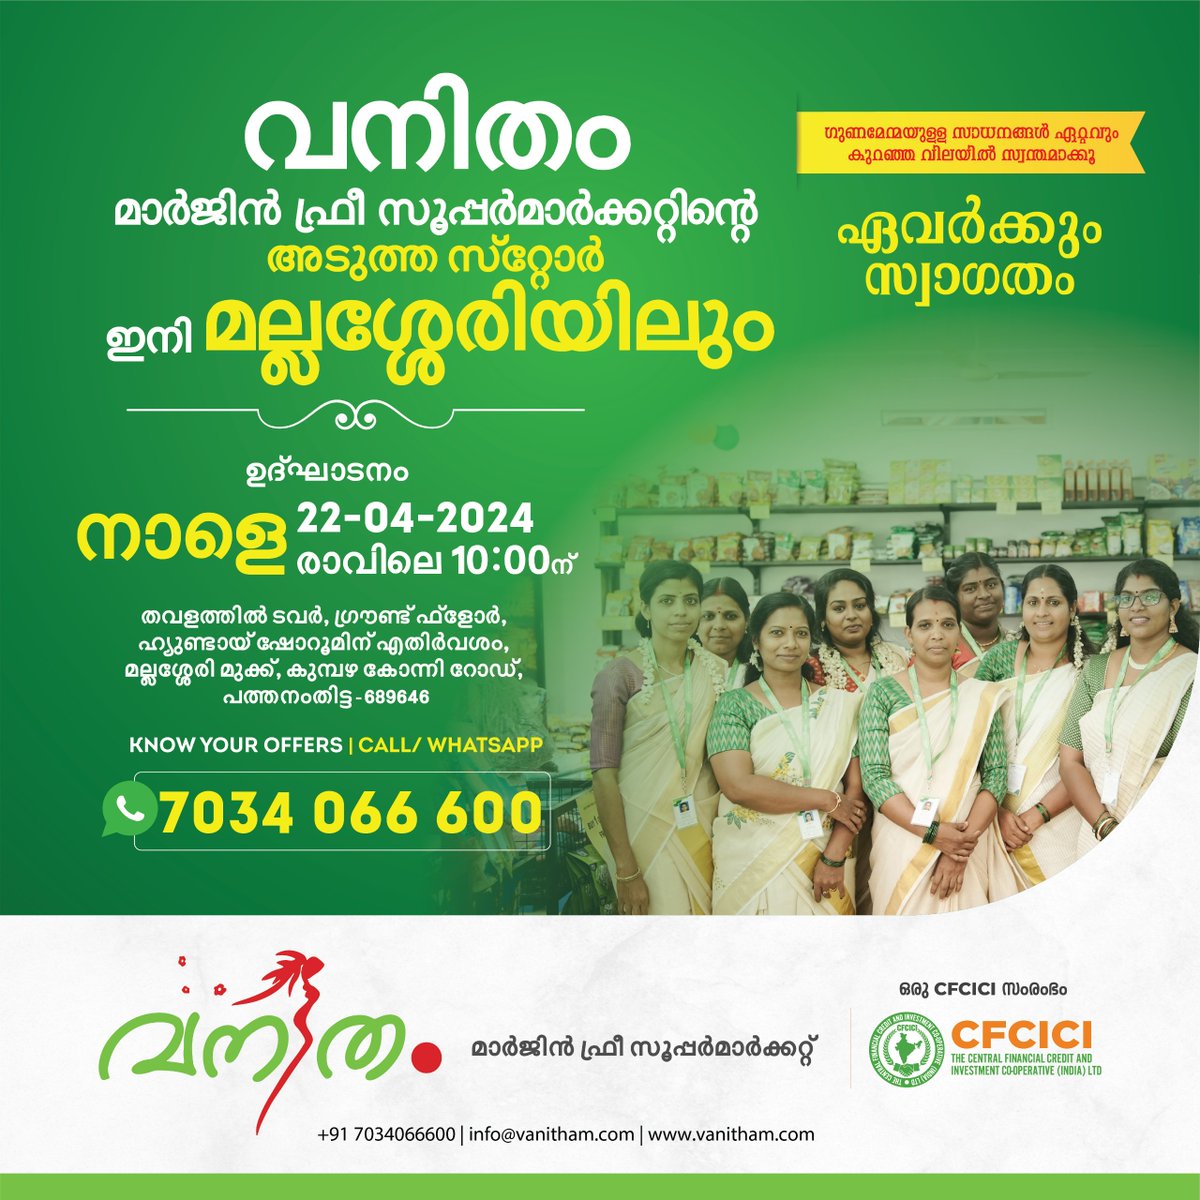 We're excited to announce the grand opening of Vanitha Margin Free Supermarket in Mallassery!

Join us on April 22nd  for amazing deals on all your grocery needs .

#VanithaSupermarket.#MarginFree #Quality #AffordablePrices #SaveMoney #Kerala #SupportLocal #mallassery